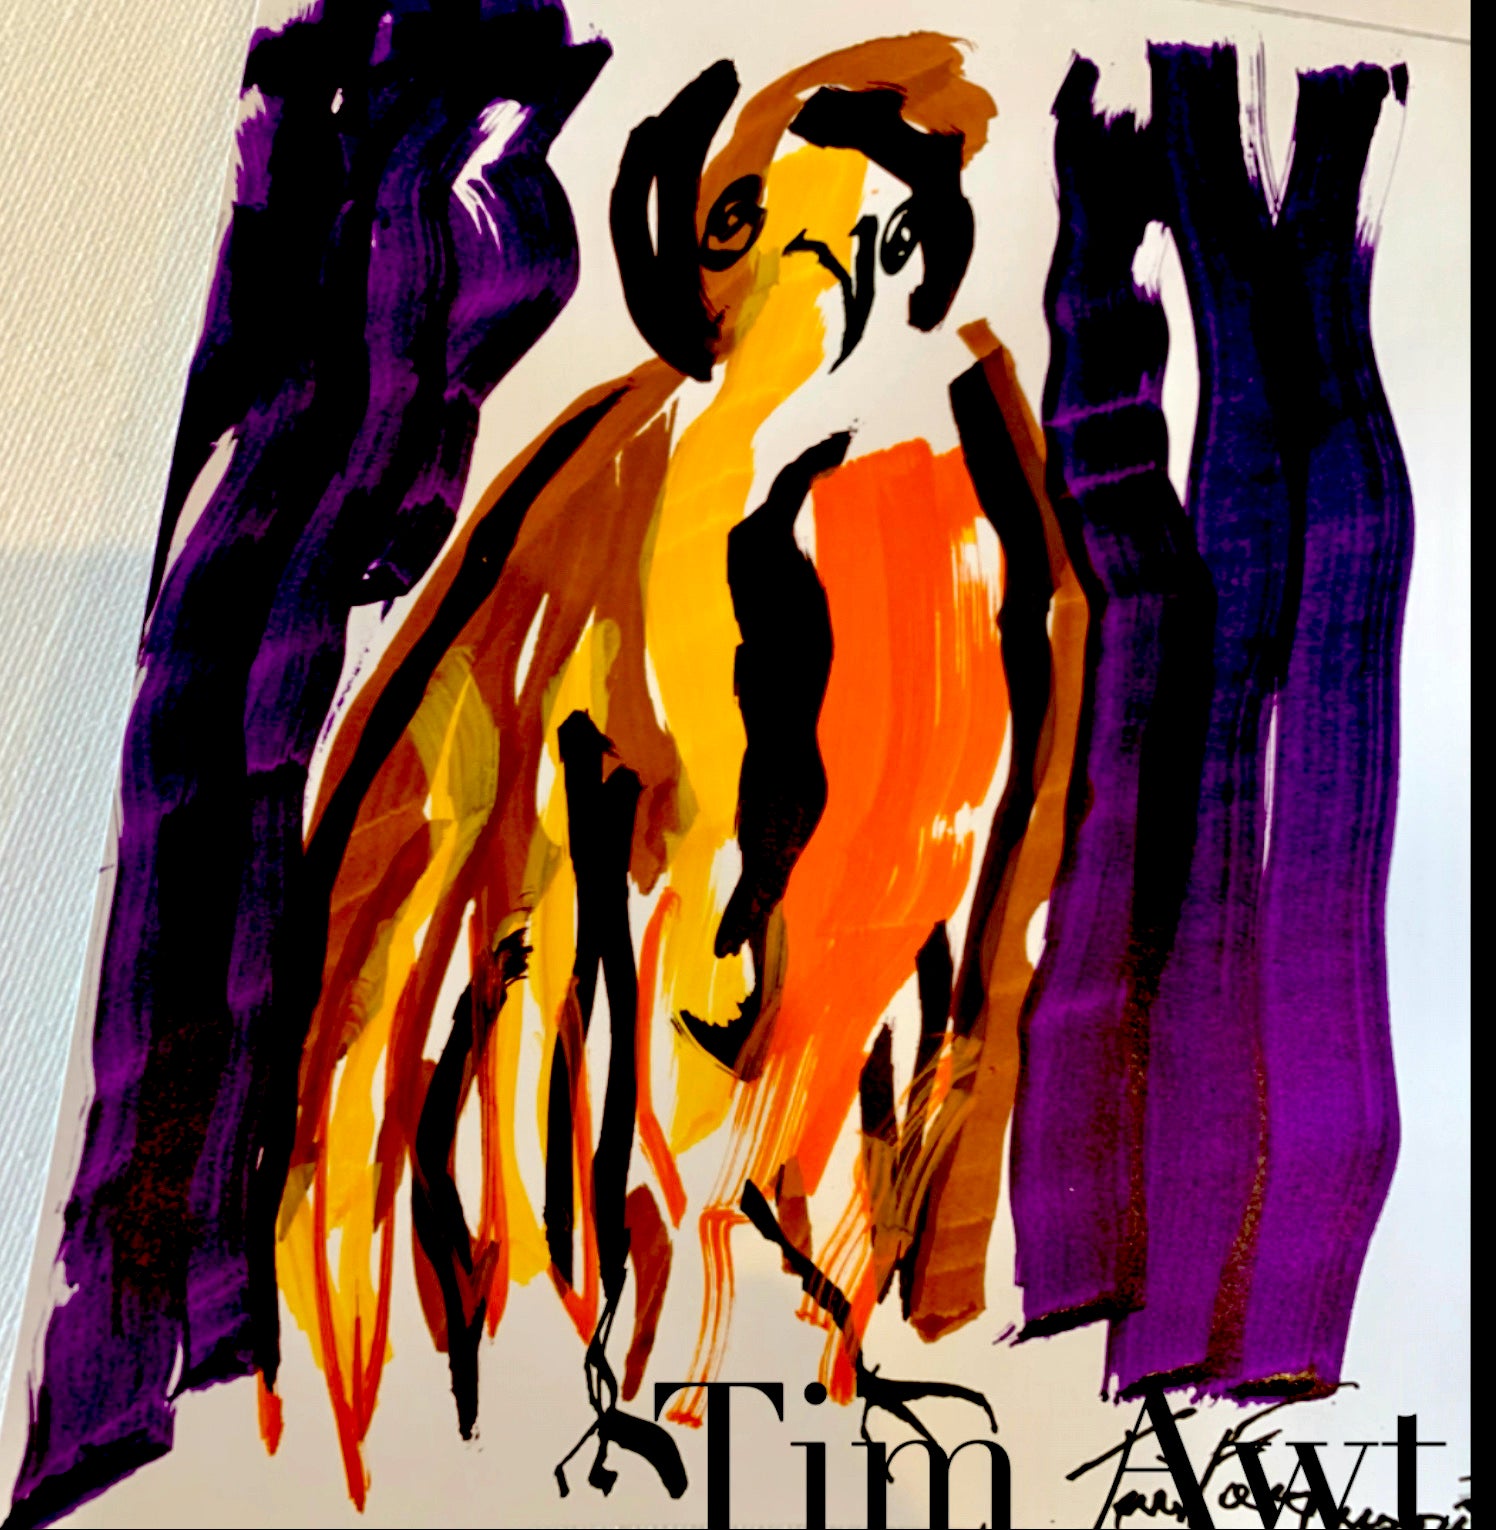 Image of Tim's artwork. An owl with broad brush strokes orange, yellow and brown. Either side of the owl are long purple and black brush strokes